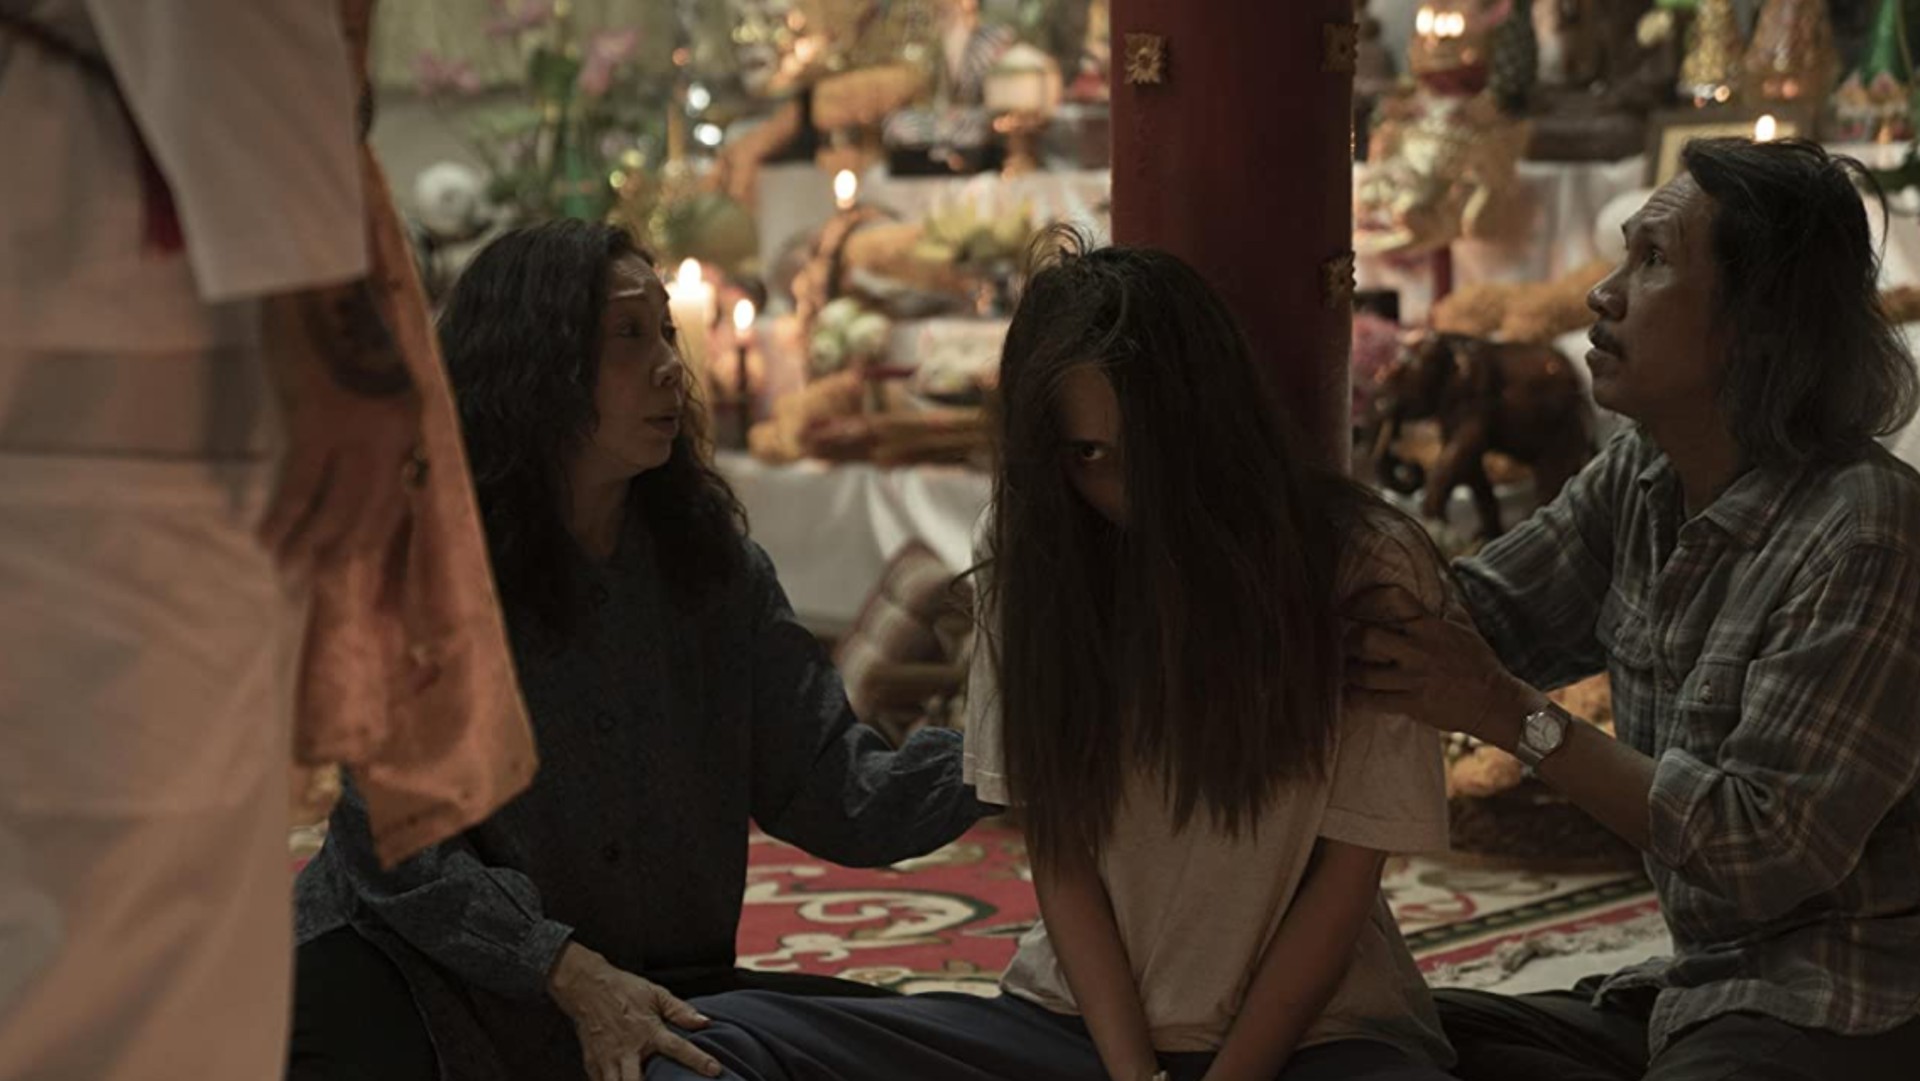 Scared of Mink in Thai horror film The Medium? So was the actress